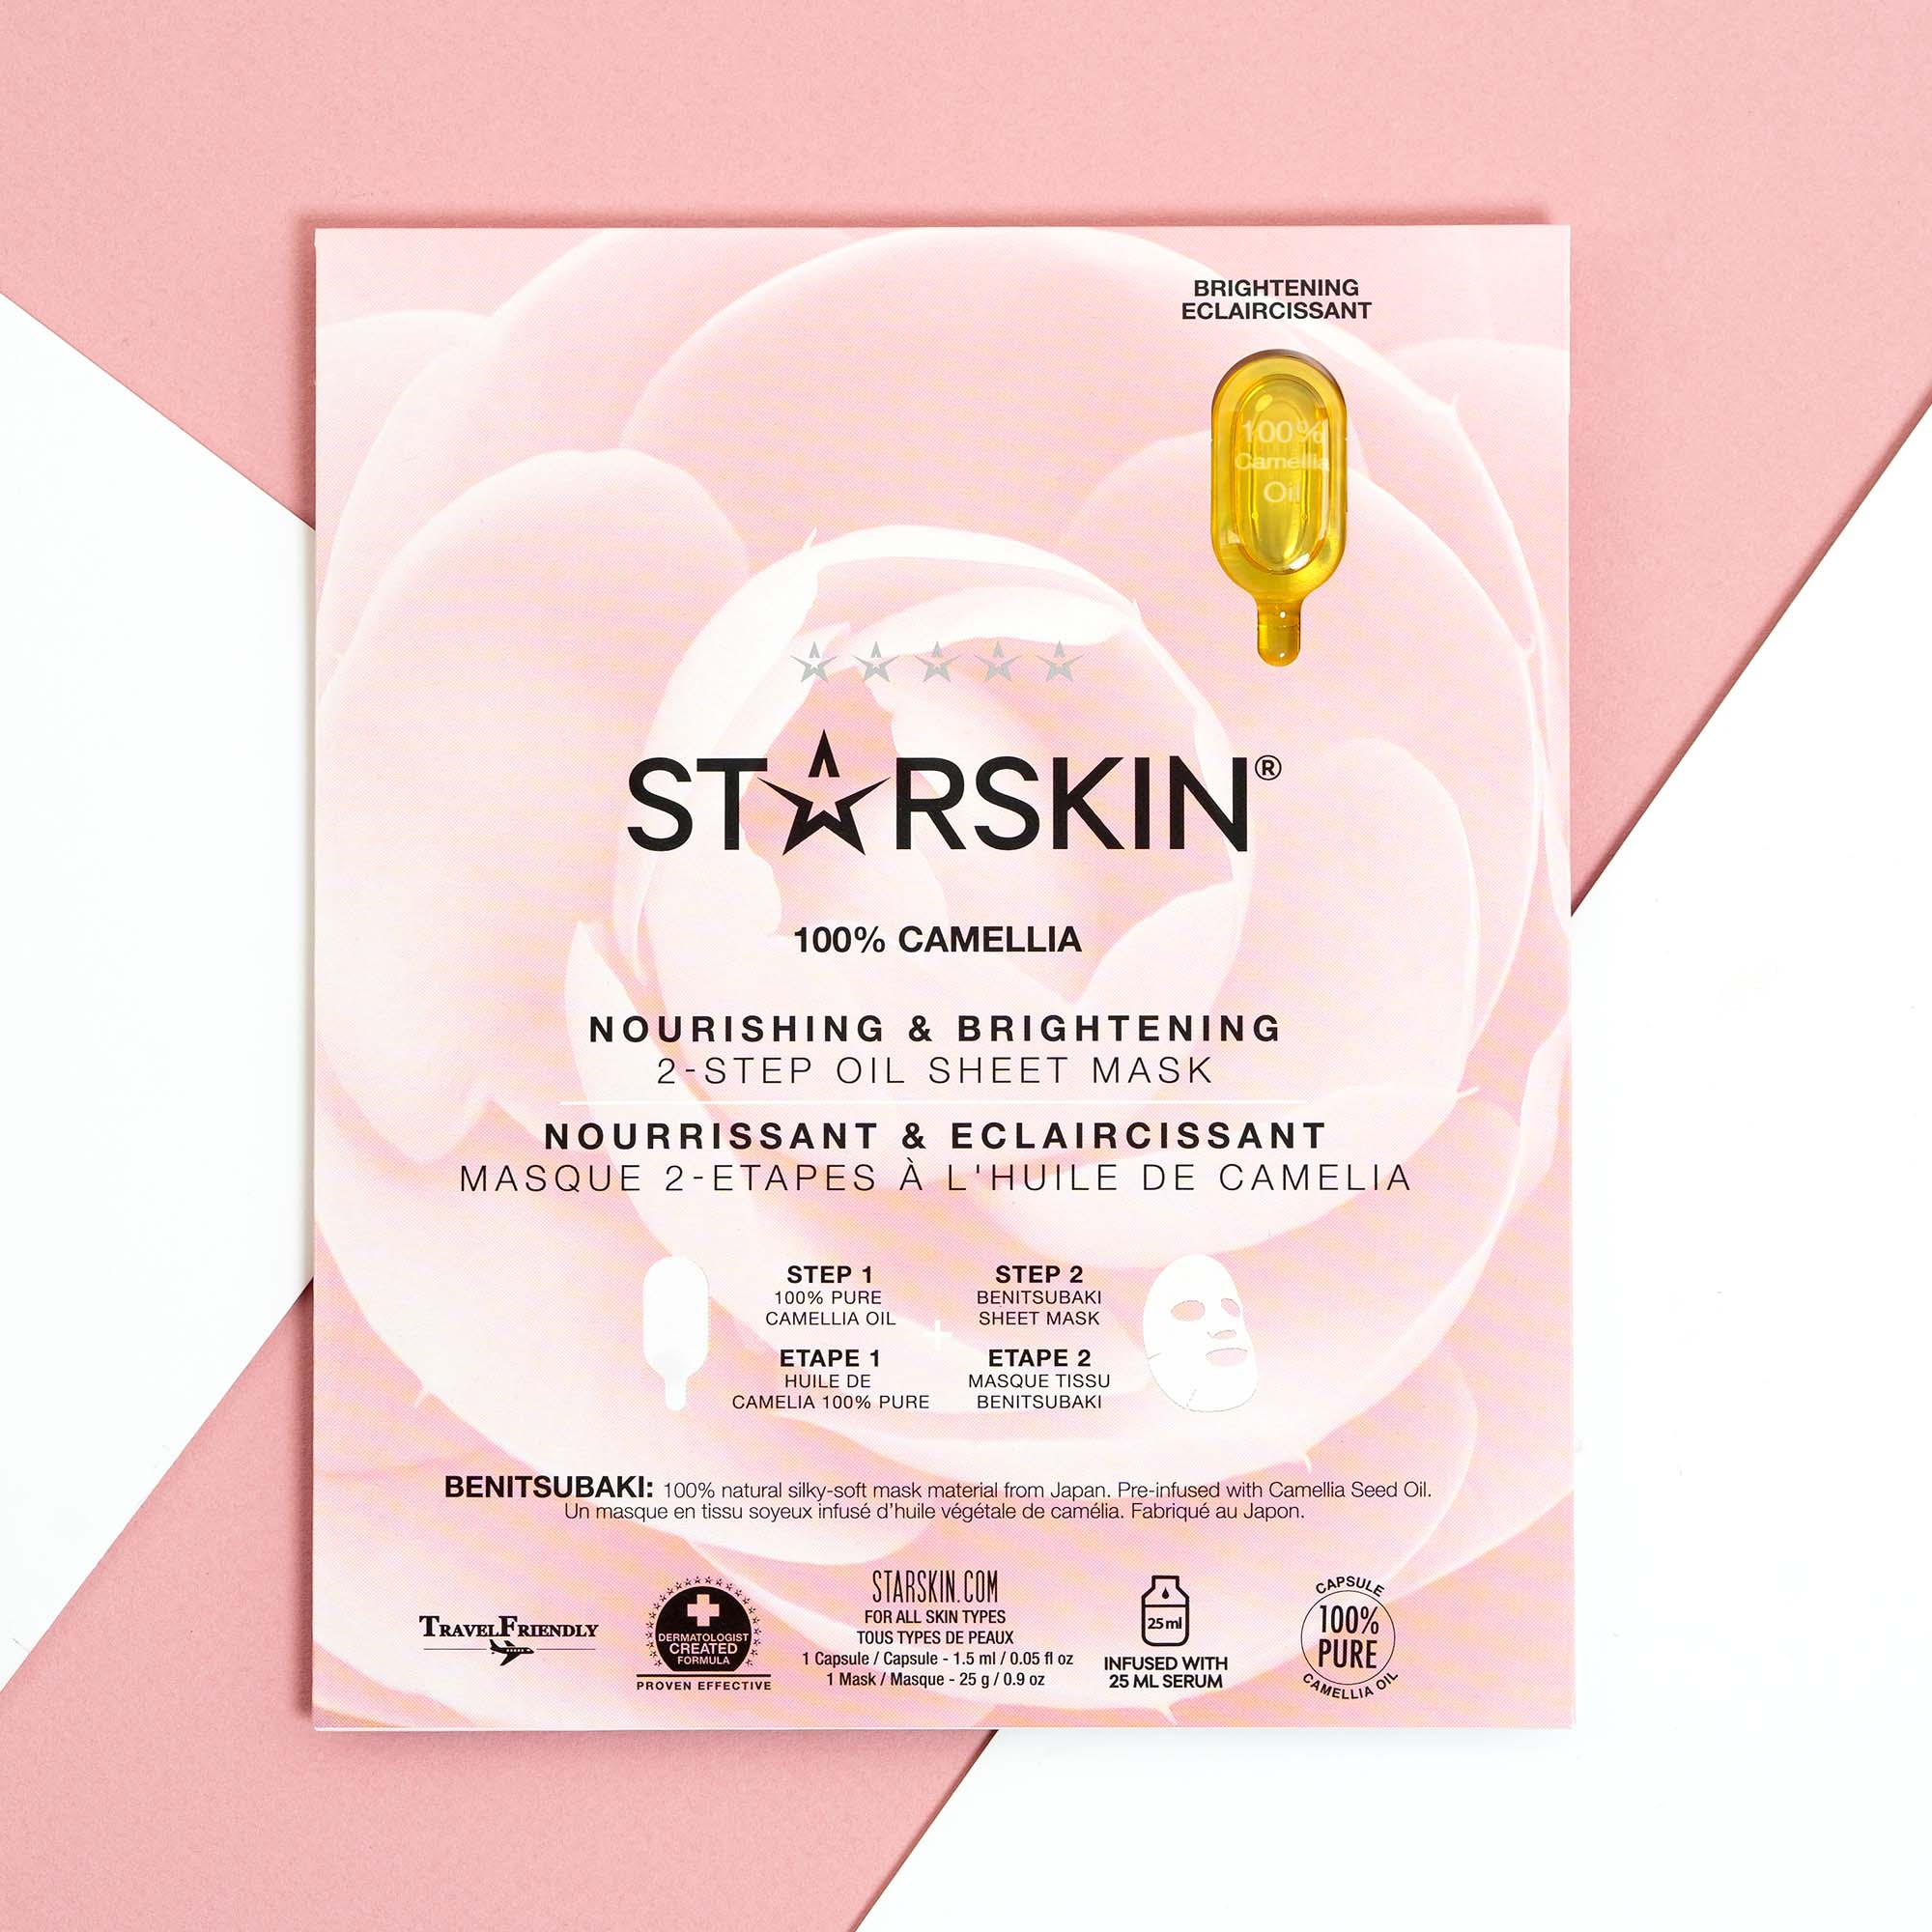 Starskin's Camellia face sheet mask product packaging being shown on a pink and white background